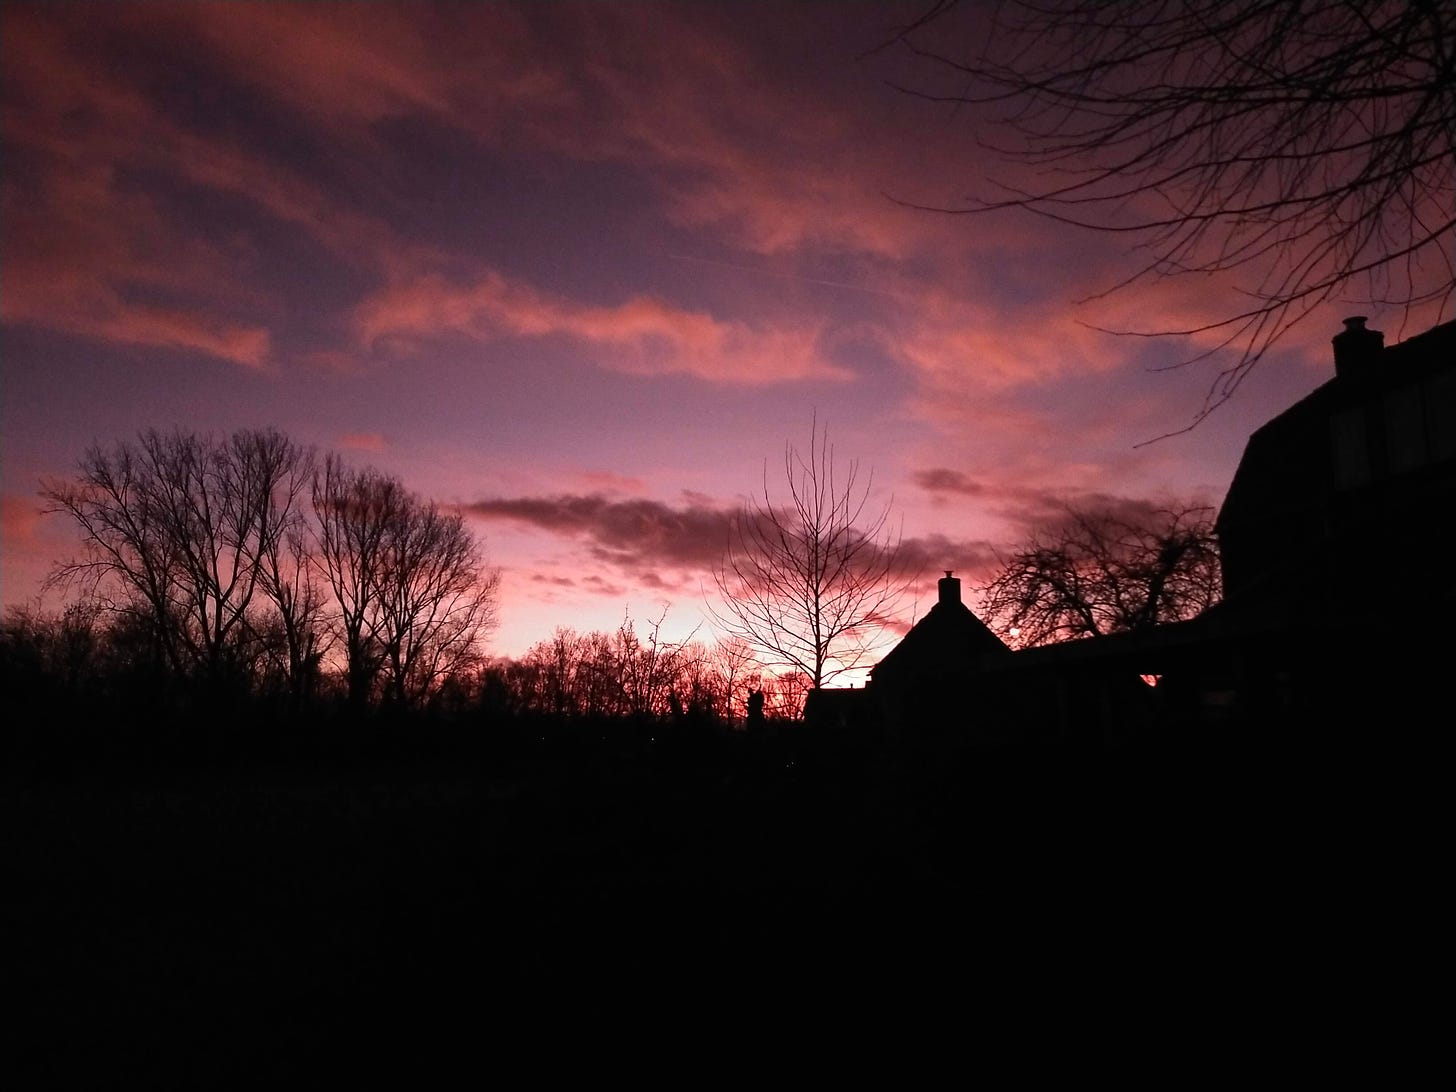 A pink and purple sunset sky over the black silhouette of houses and trees.